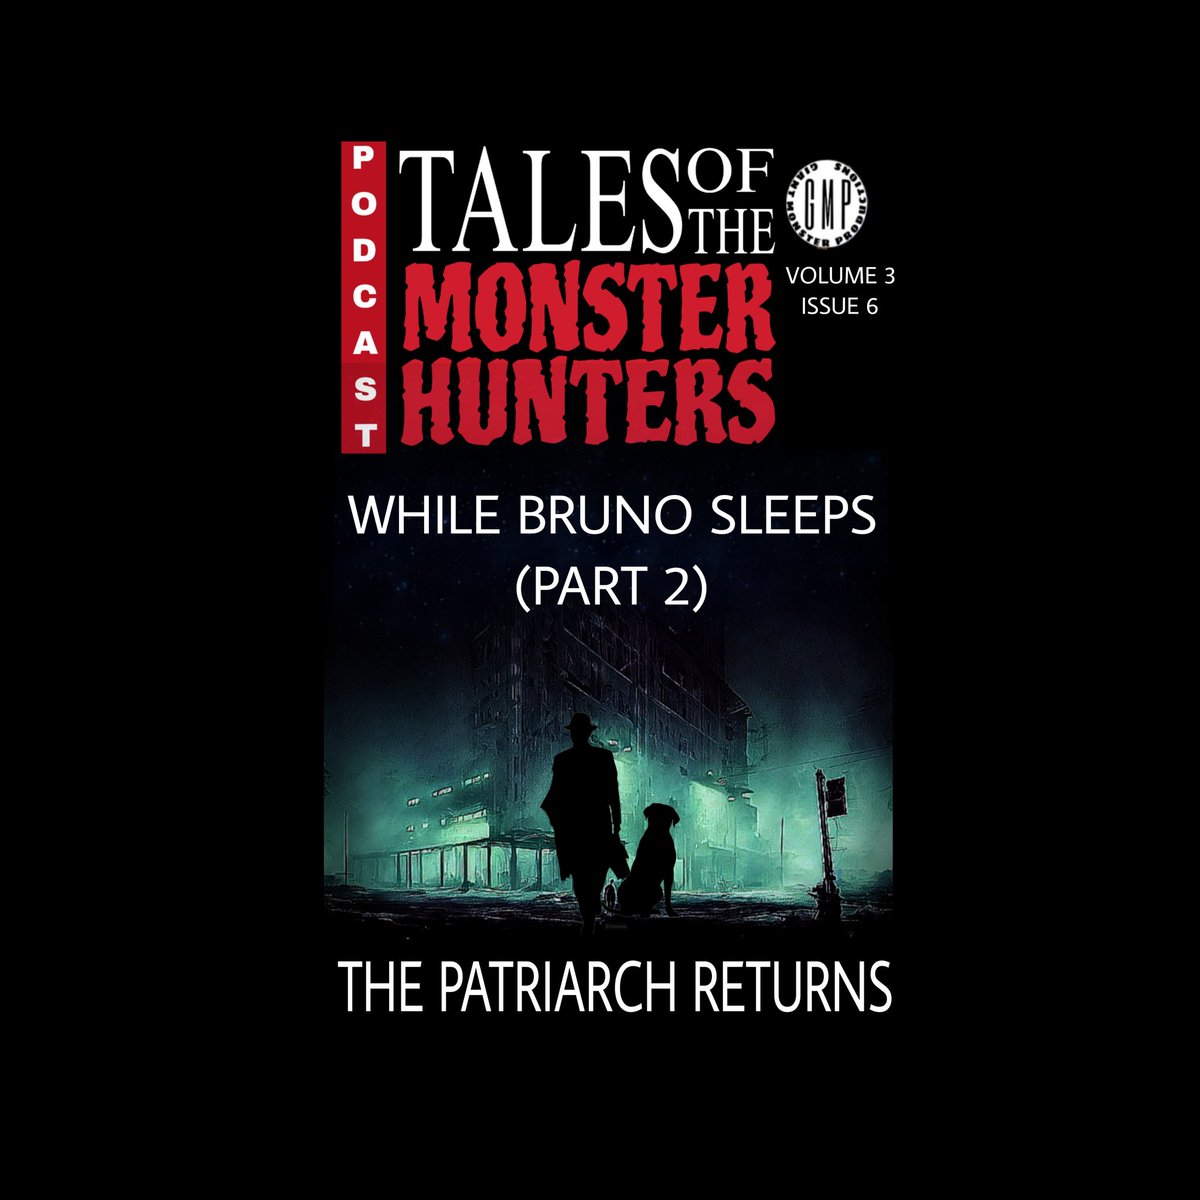 Coming Monday, April 8. Available wherever you get podcasts. @SNWASOT (Jim Cogan) @MysticWaterzYT @RobertaVoices @Ashley_T_Acting @JK__VA @Ren_cant @Raven_singing_ #GMP #talesofthemonsterhunterspodcast #audiofiction #audiocomedy #audiodrama